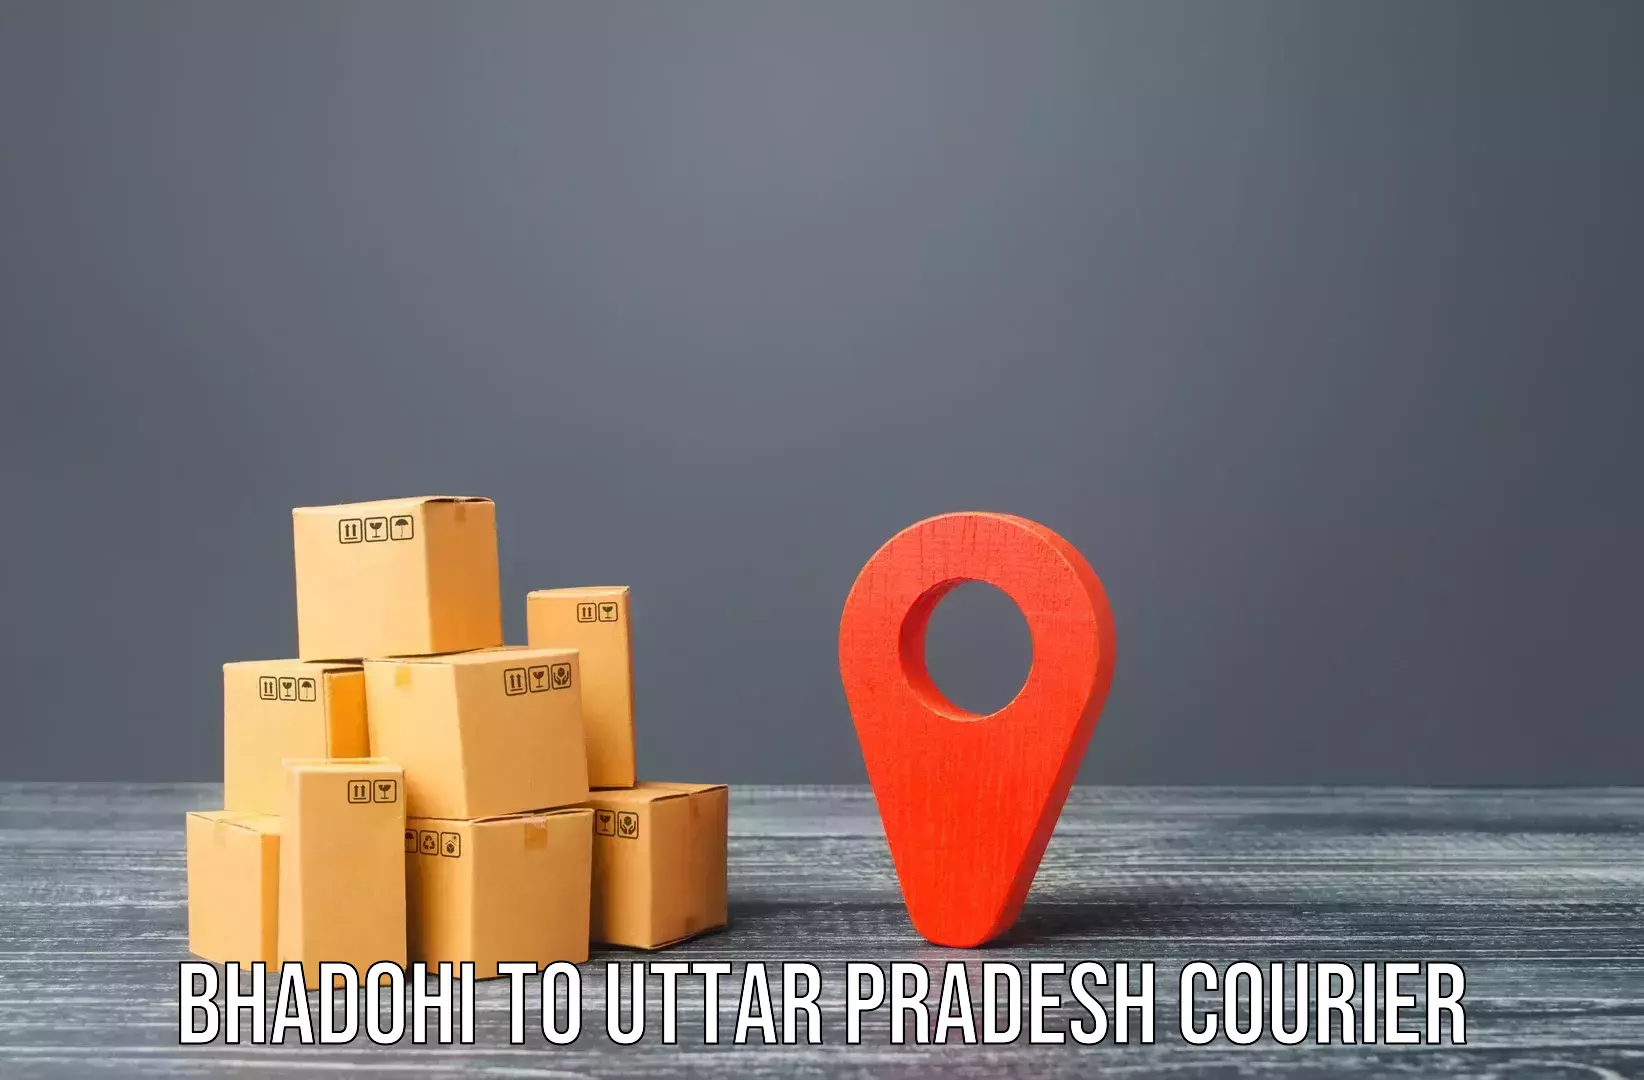 Quality relocation services in Bhadohi to Sidhauli